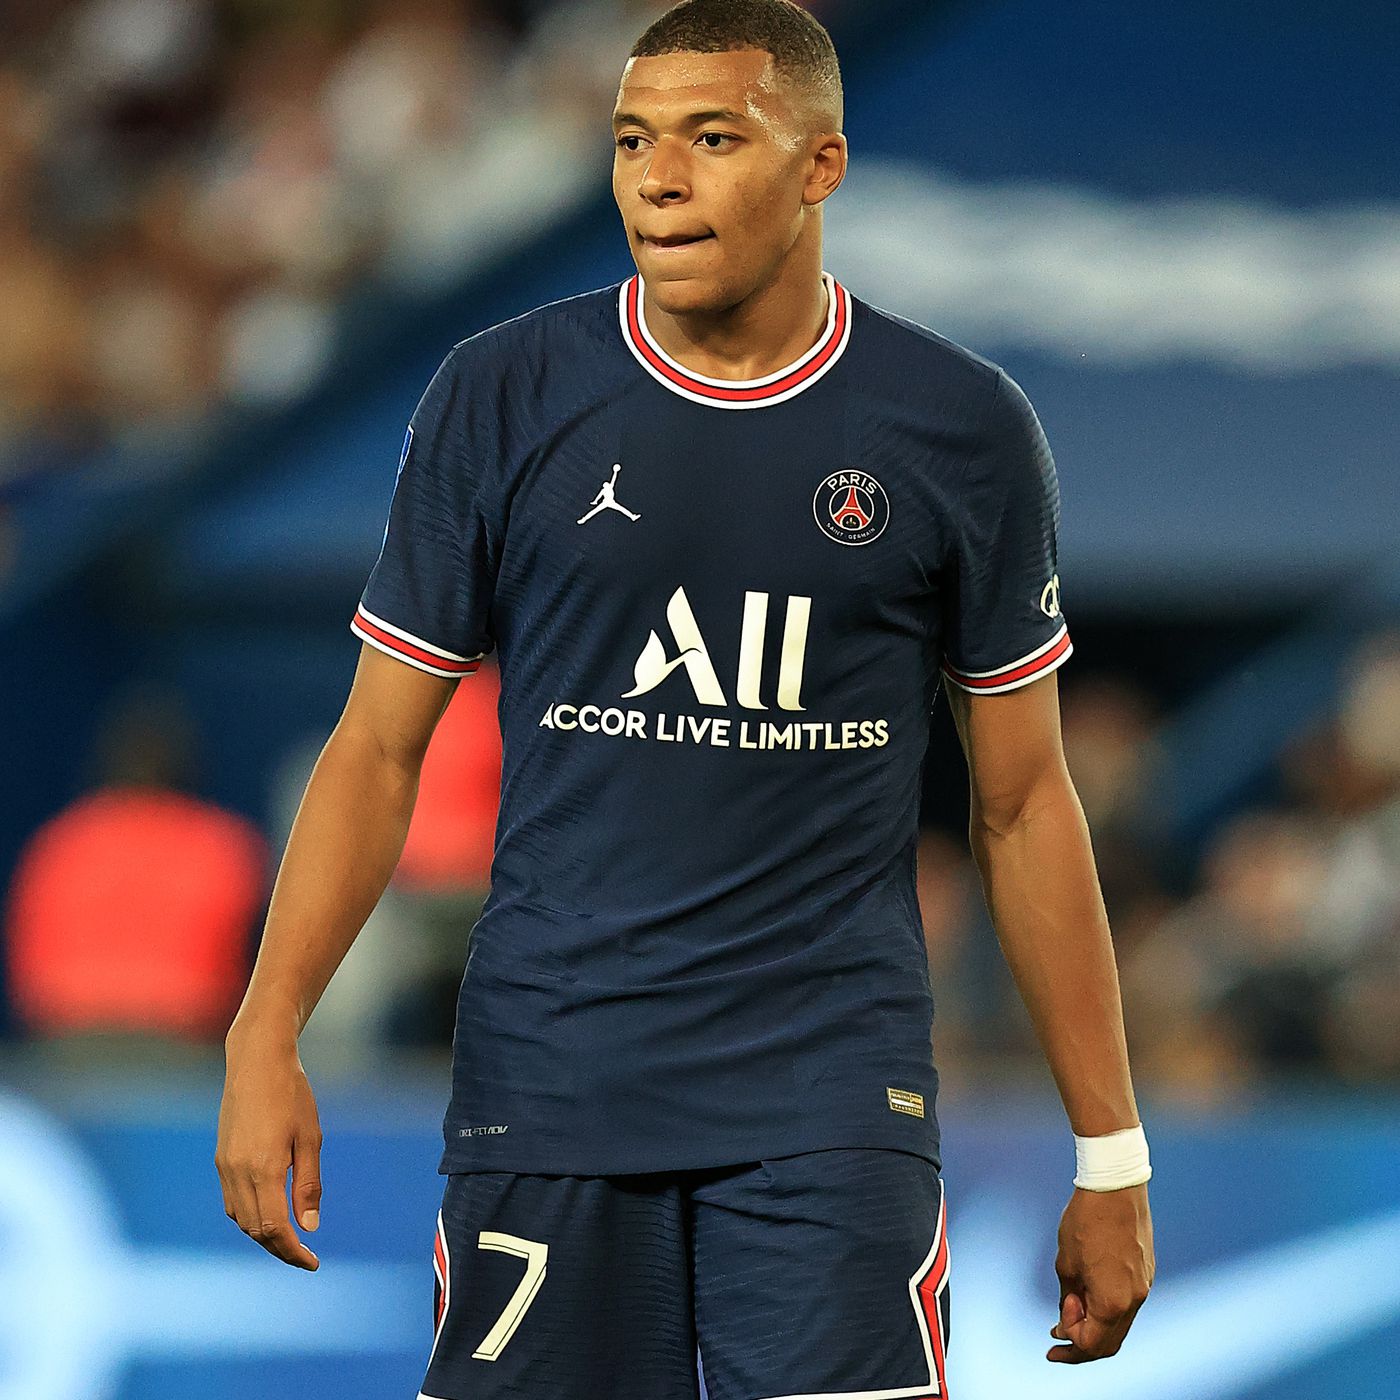 Mbappe tells PSG teammates he will stay this season, would join Real Madrid in 2022 -report